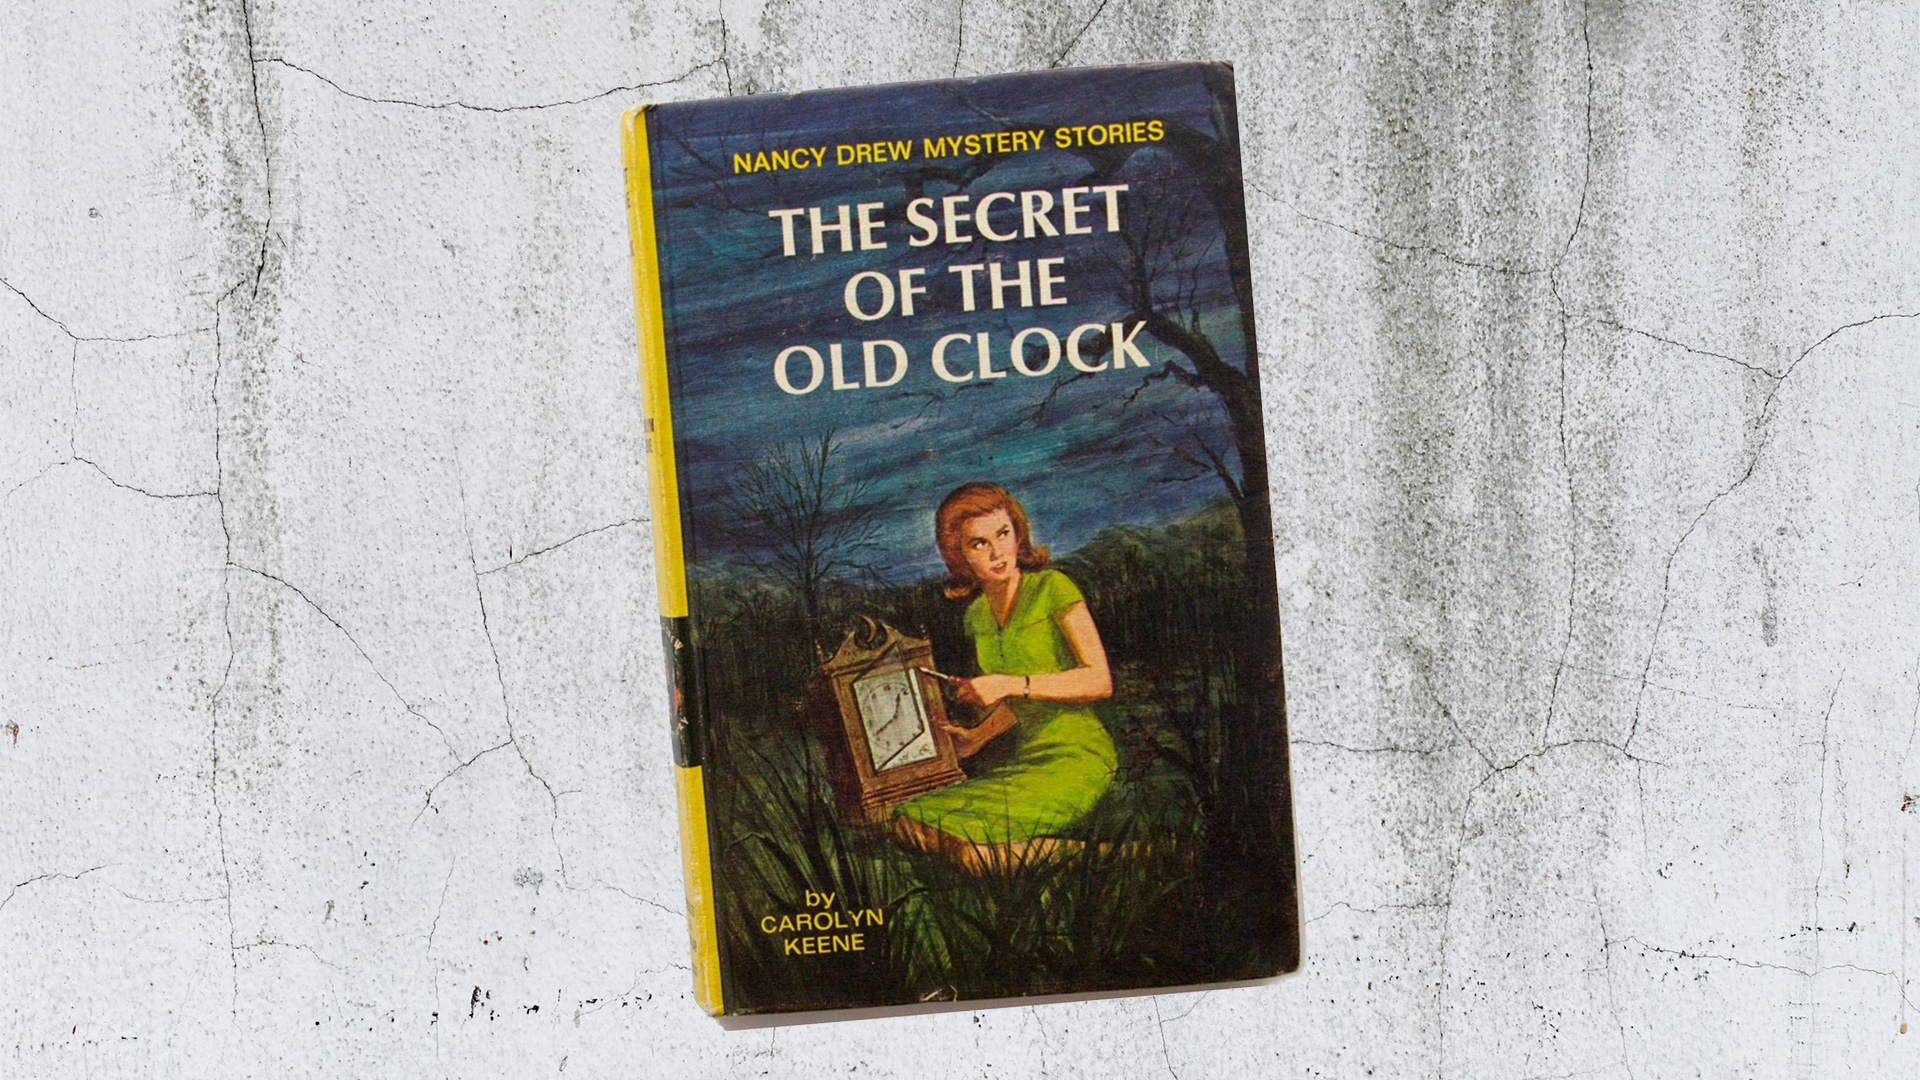 April 28, 1930: The First Book in the "Nancy Drew Mystery Stories" Was Published